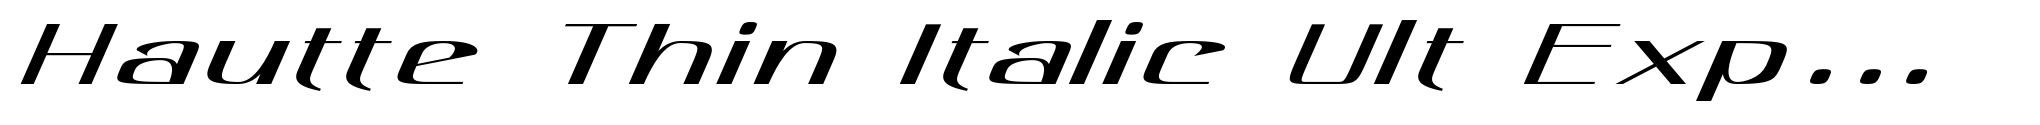 Hautte Thin Italic Ult Expanded image